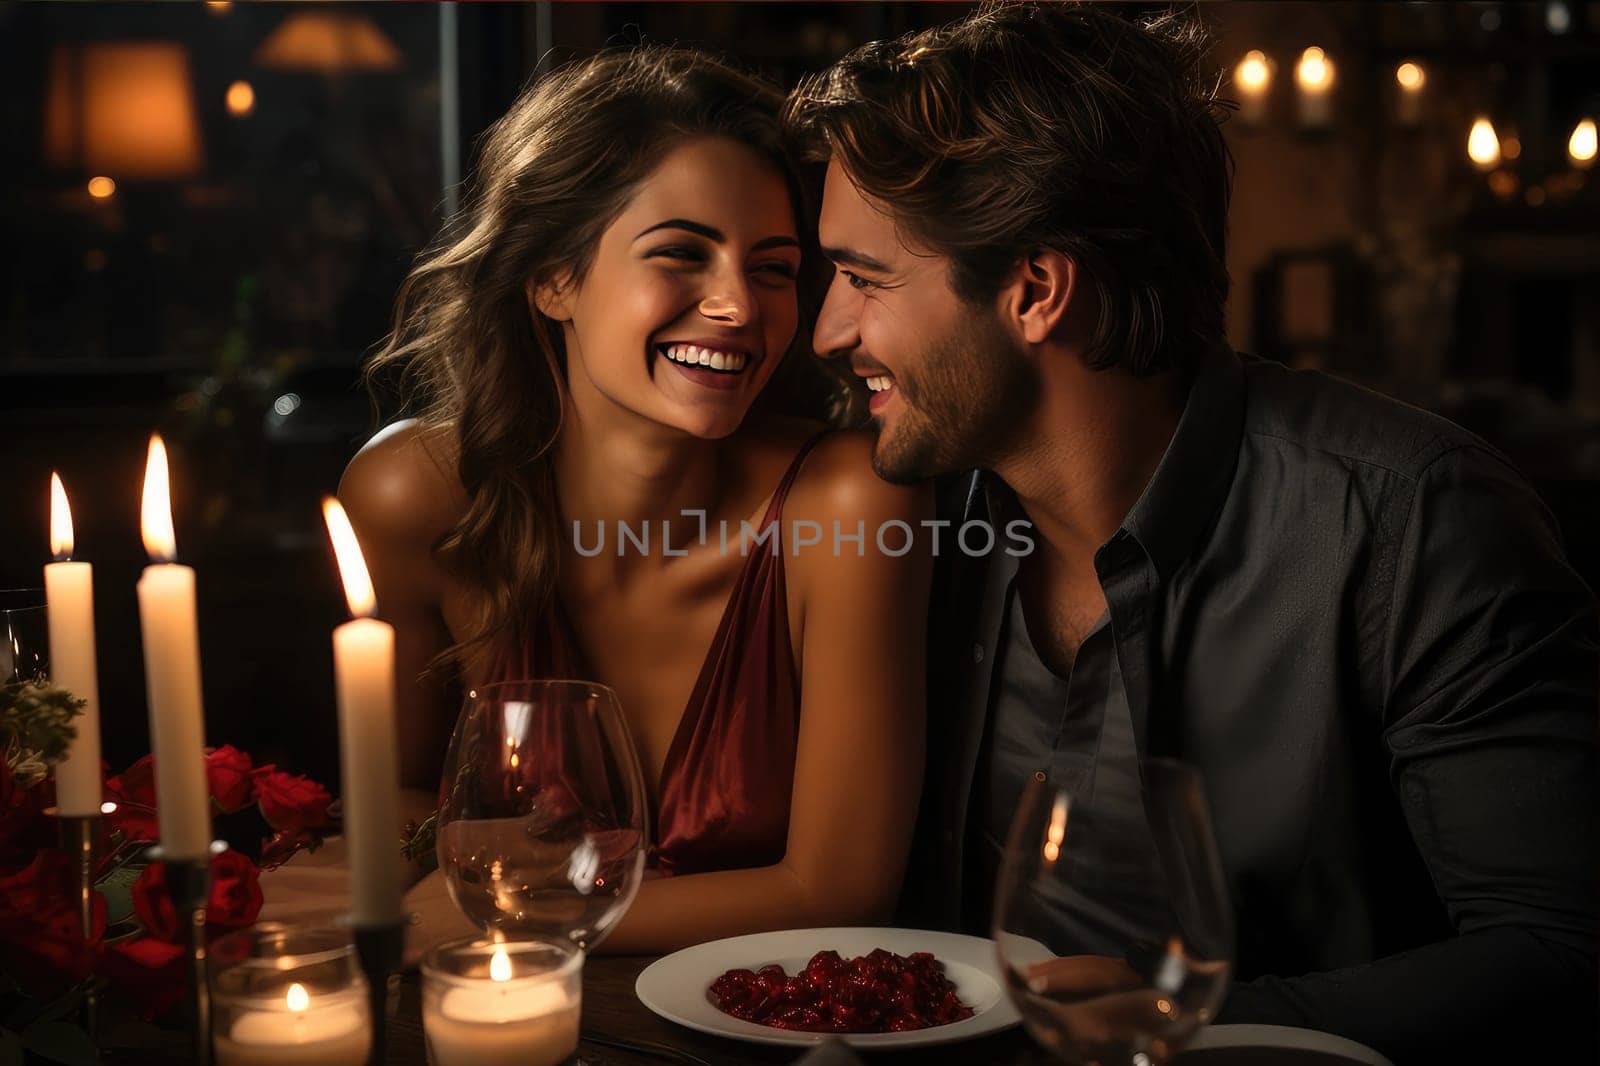 Sweet Ritual: A Woman Throws a Romantic Valentine's Day Dinner for Her Husband by Yurich32